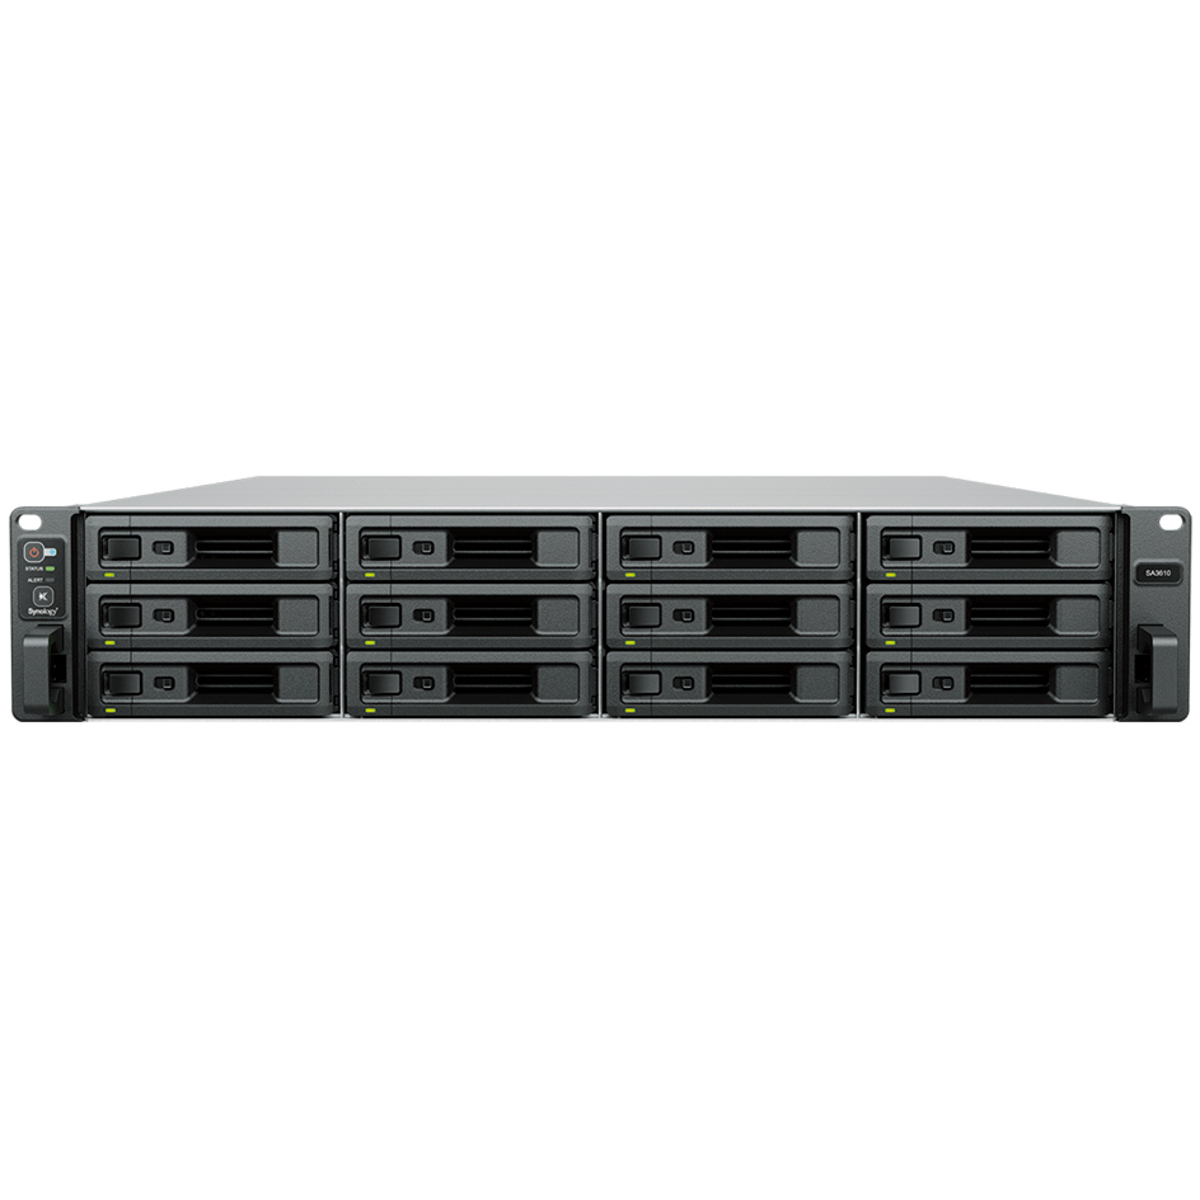 Synology RackStation SA3610 4.5tb 12-Bay RackMount Large Business / Enterprise NAS - Network Attached Storage Device 9x500gb Crucial MX500 CT500MX500SSD1 2.5 560/510MB/s SATA 6Gb/s SSD CONSUMER Class Drives Installed - Burn-In Tested RackStation SA3610